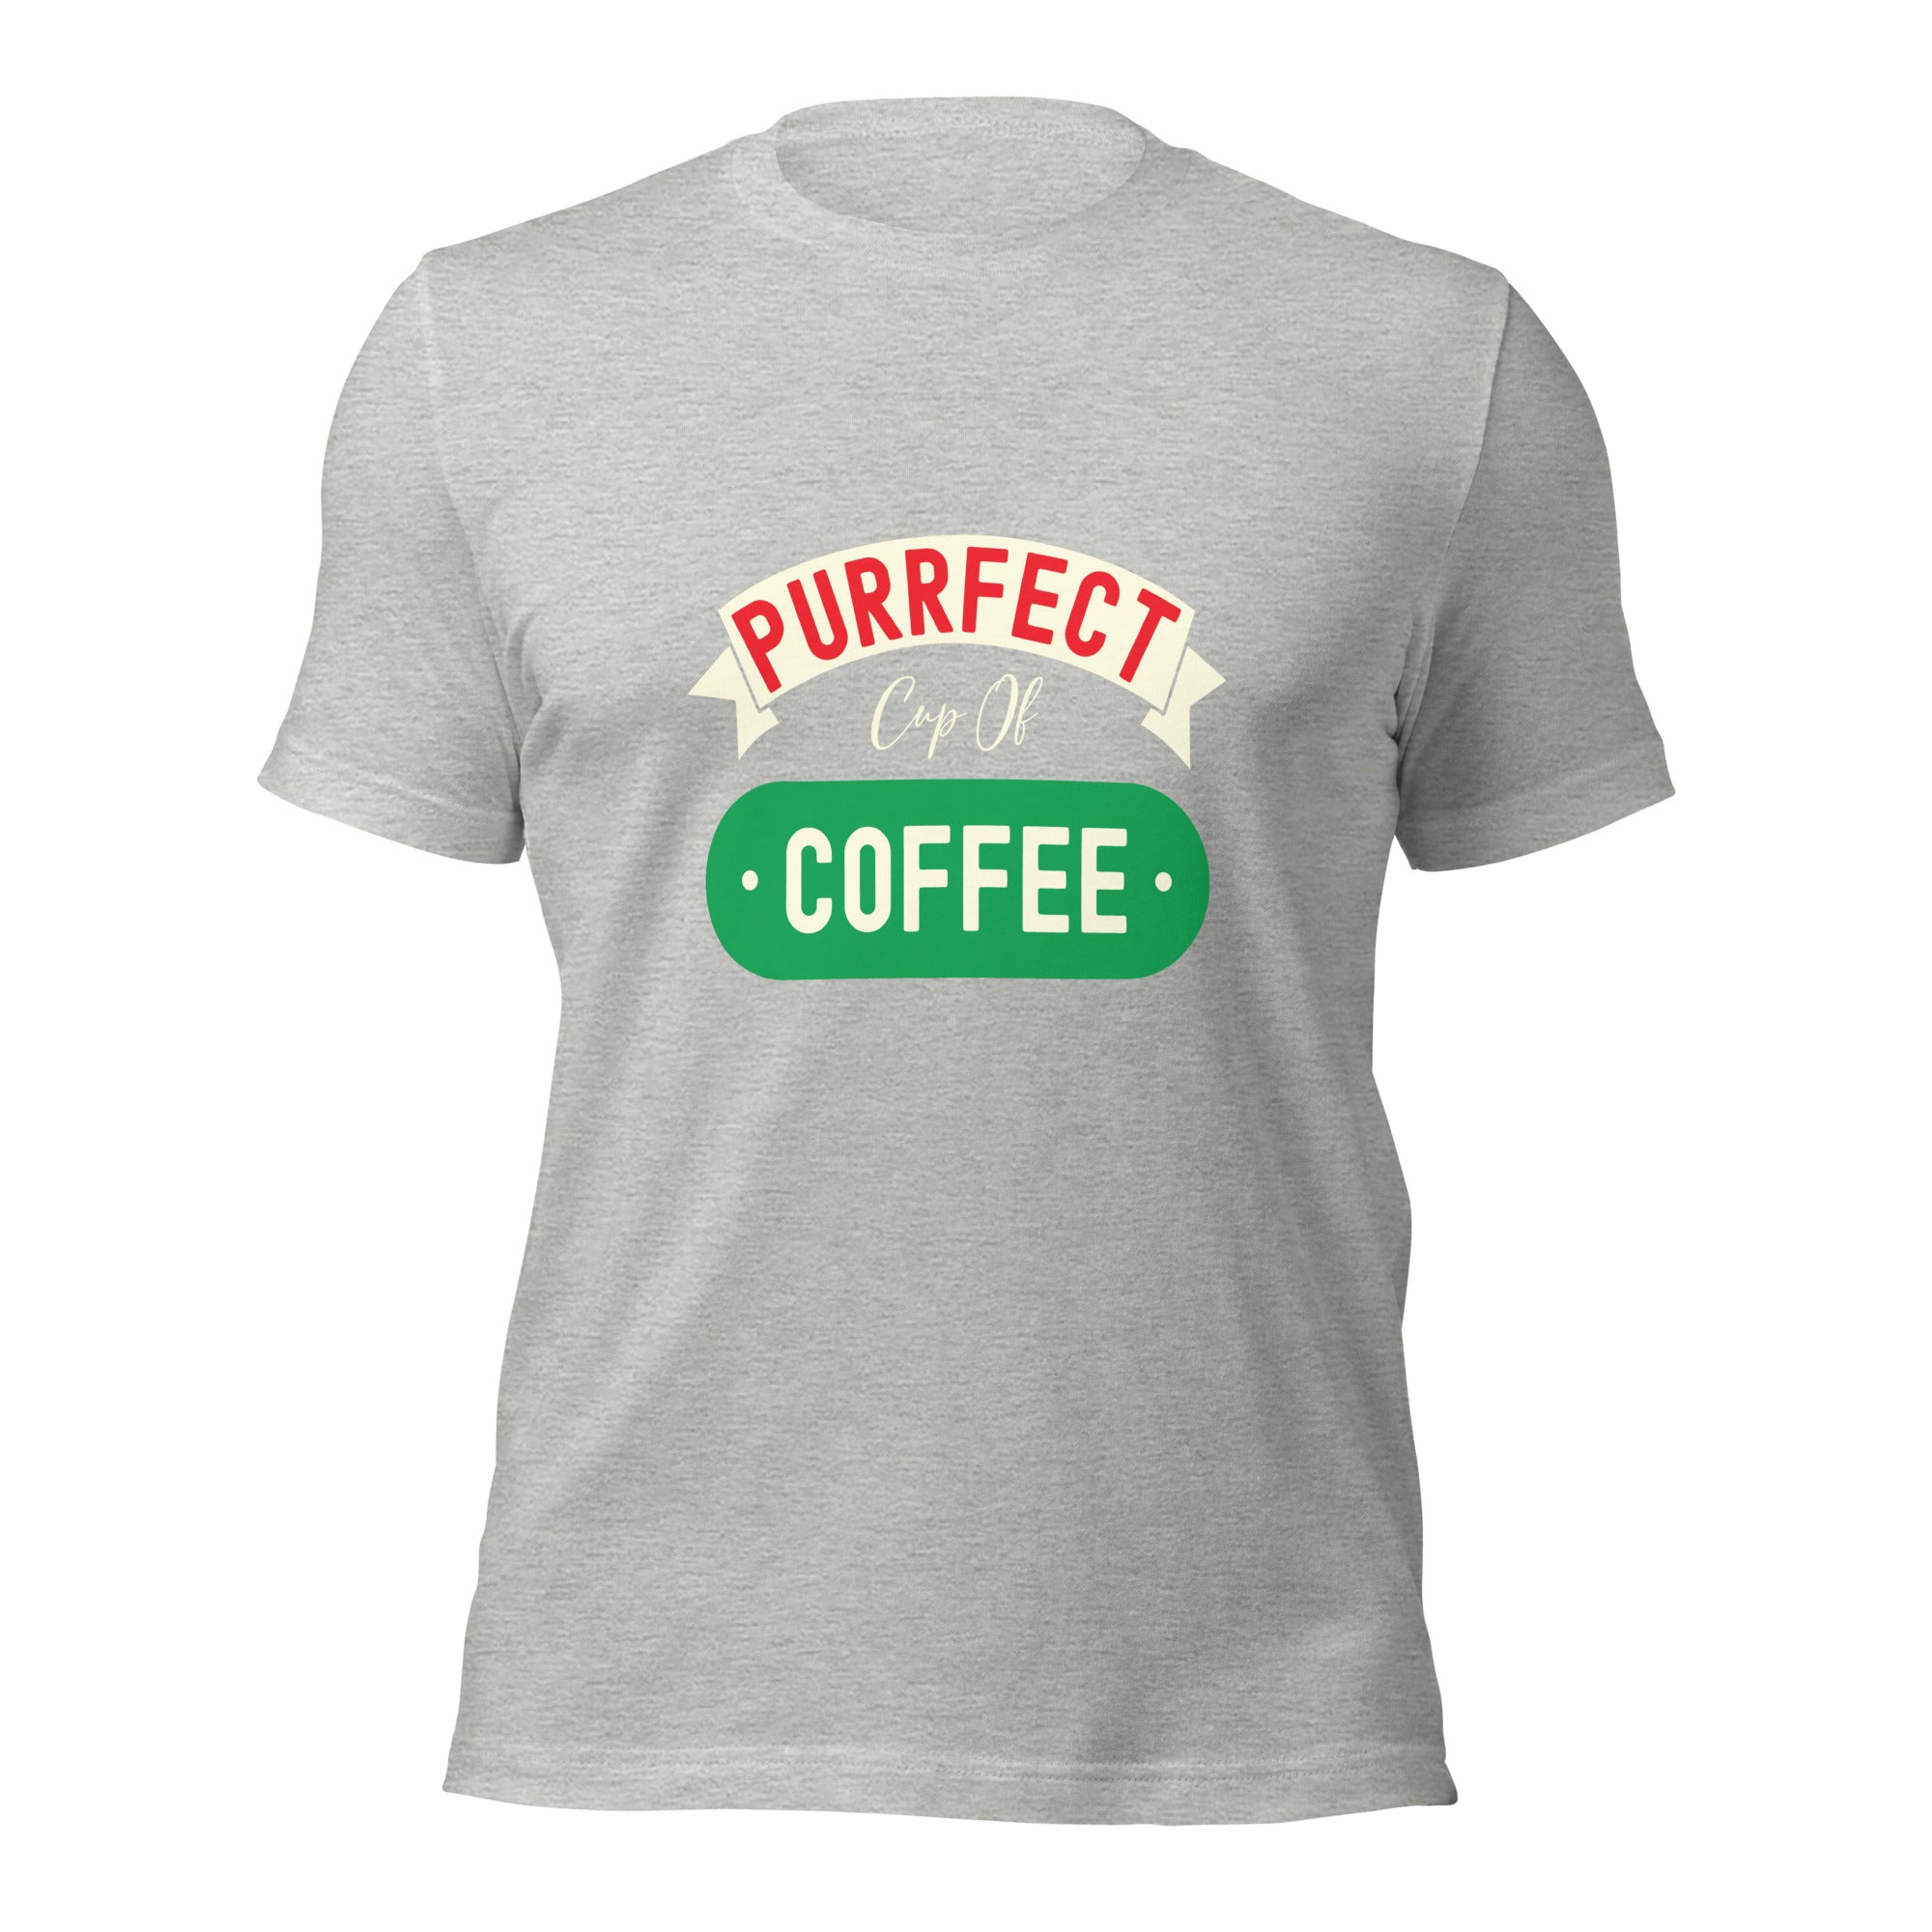 Unisex t-shirt | Purrfect cup of coffee